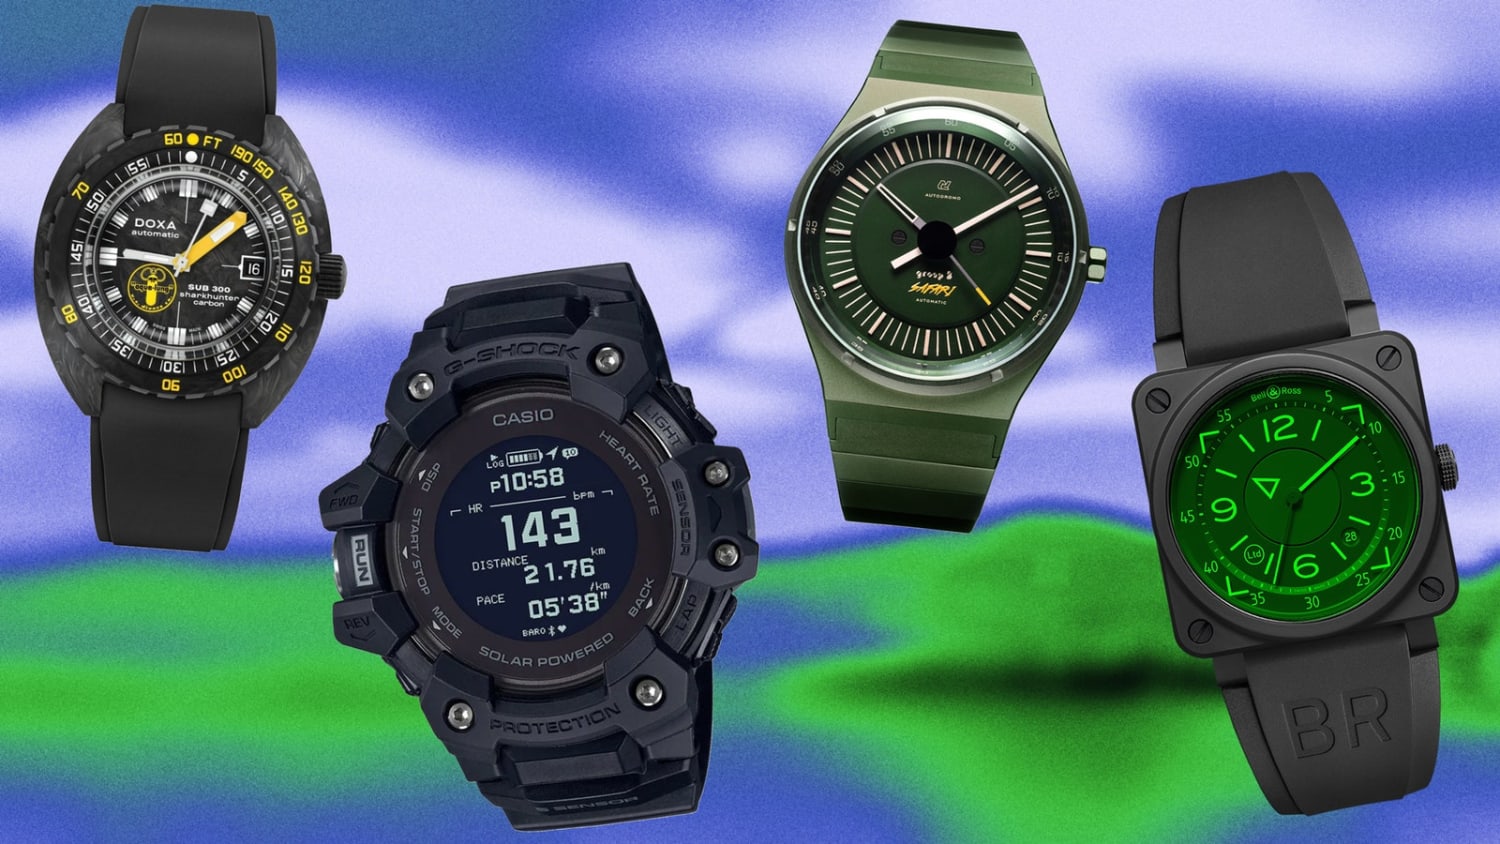 The Coolest New Watches to Buy Right Now